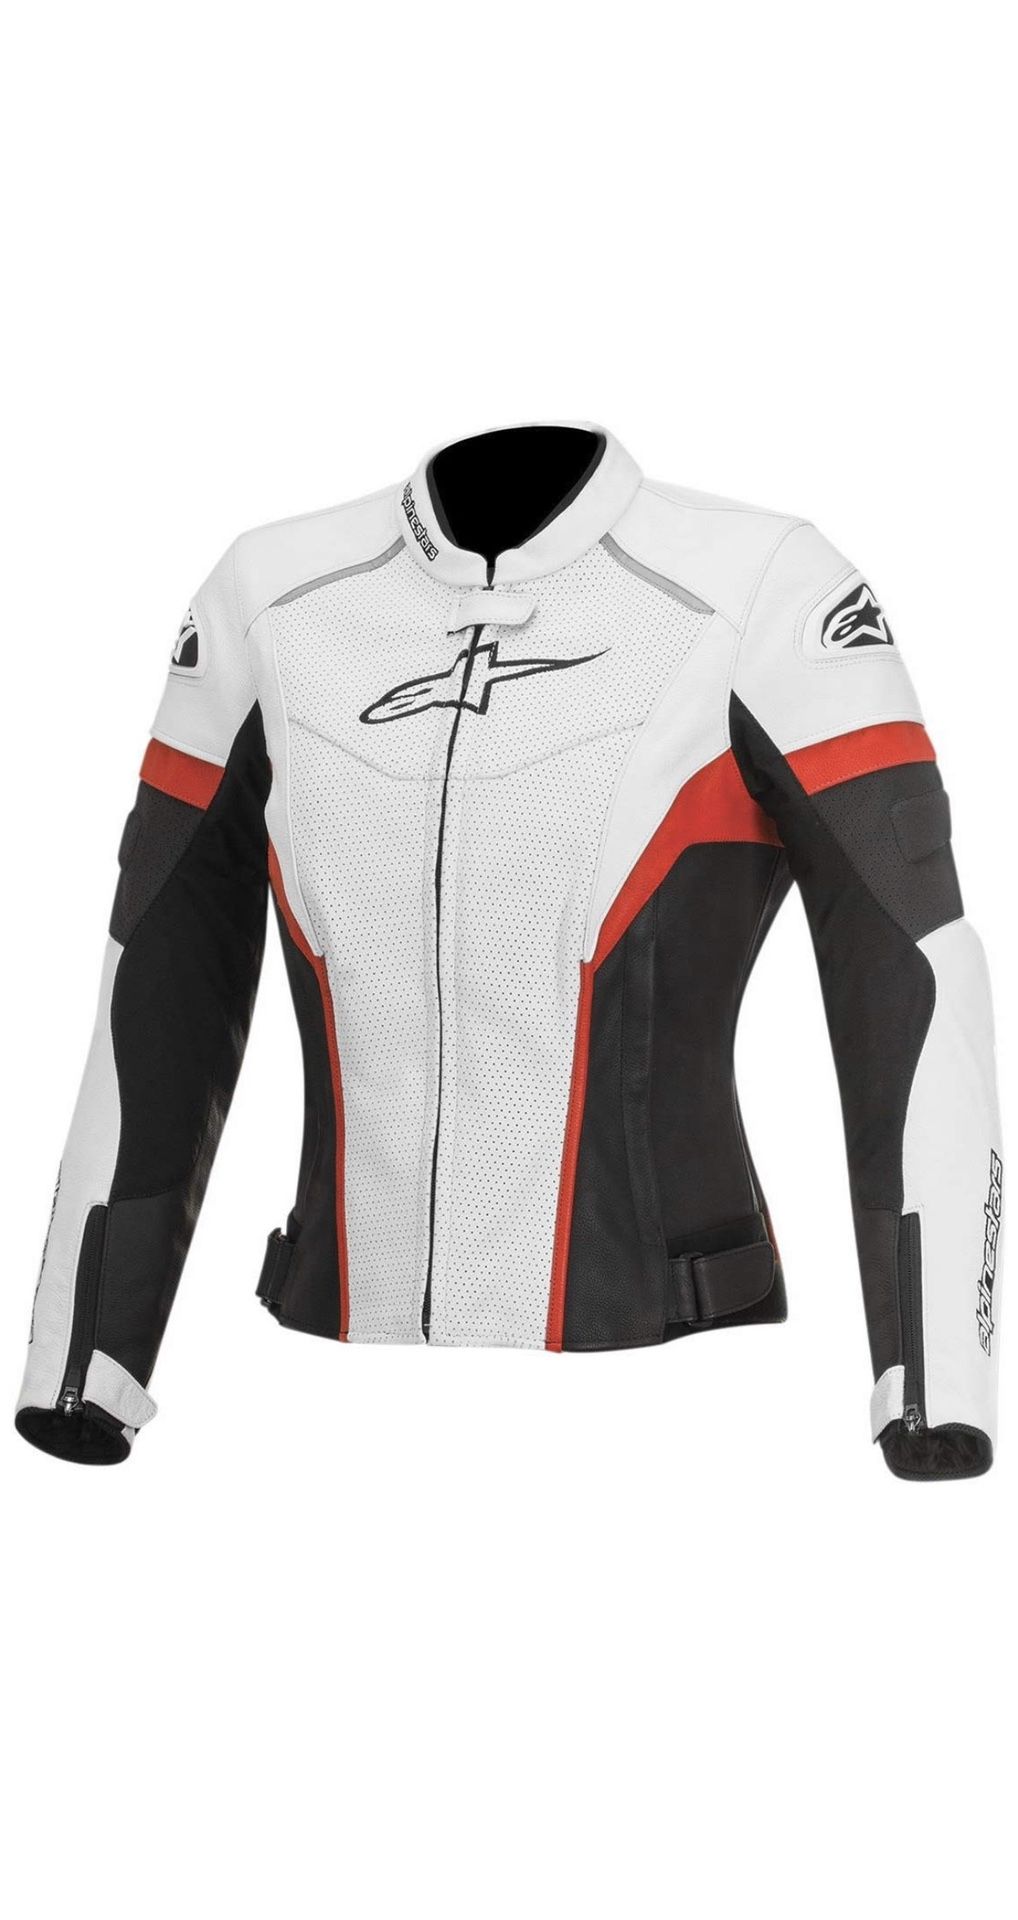 New Alpinestars GP Plus R Perforated Women's Street Motorcycle Jackets - White/Black/Red / Size 42